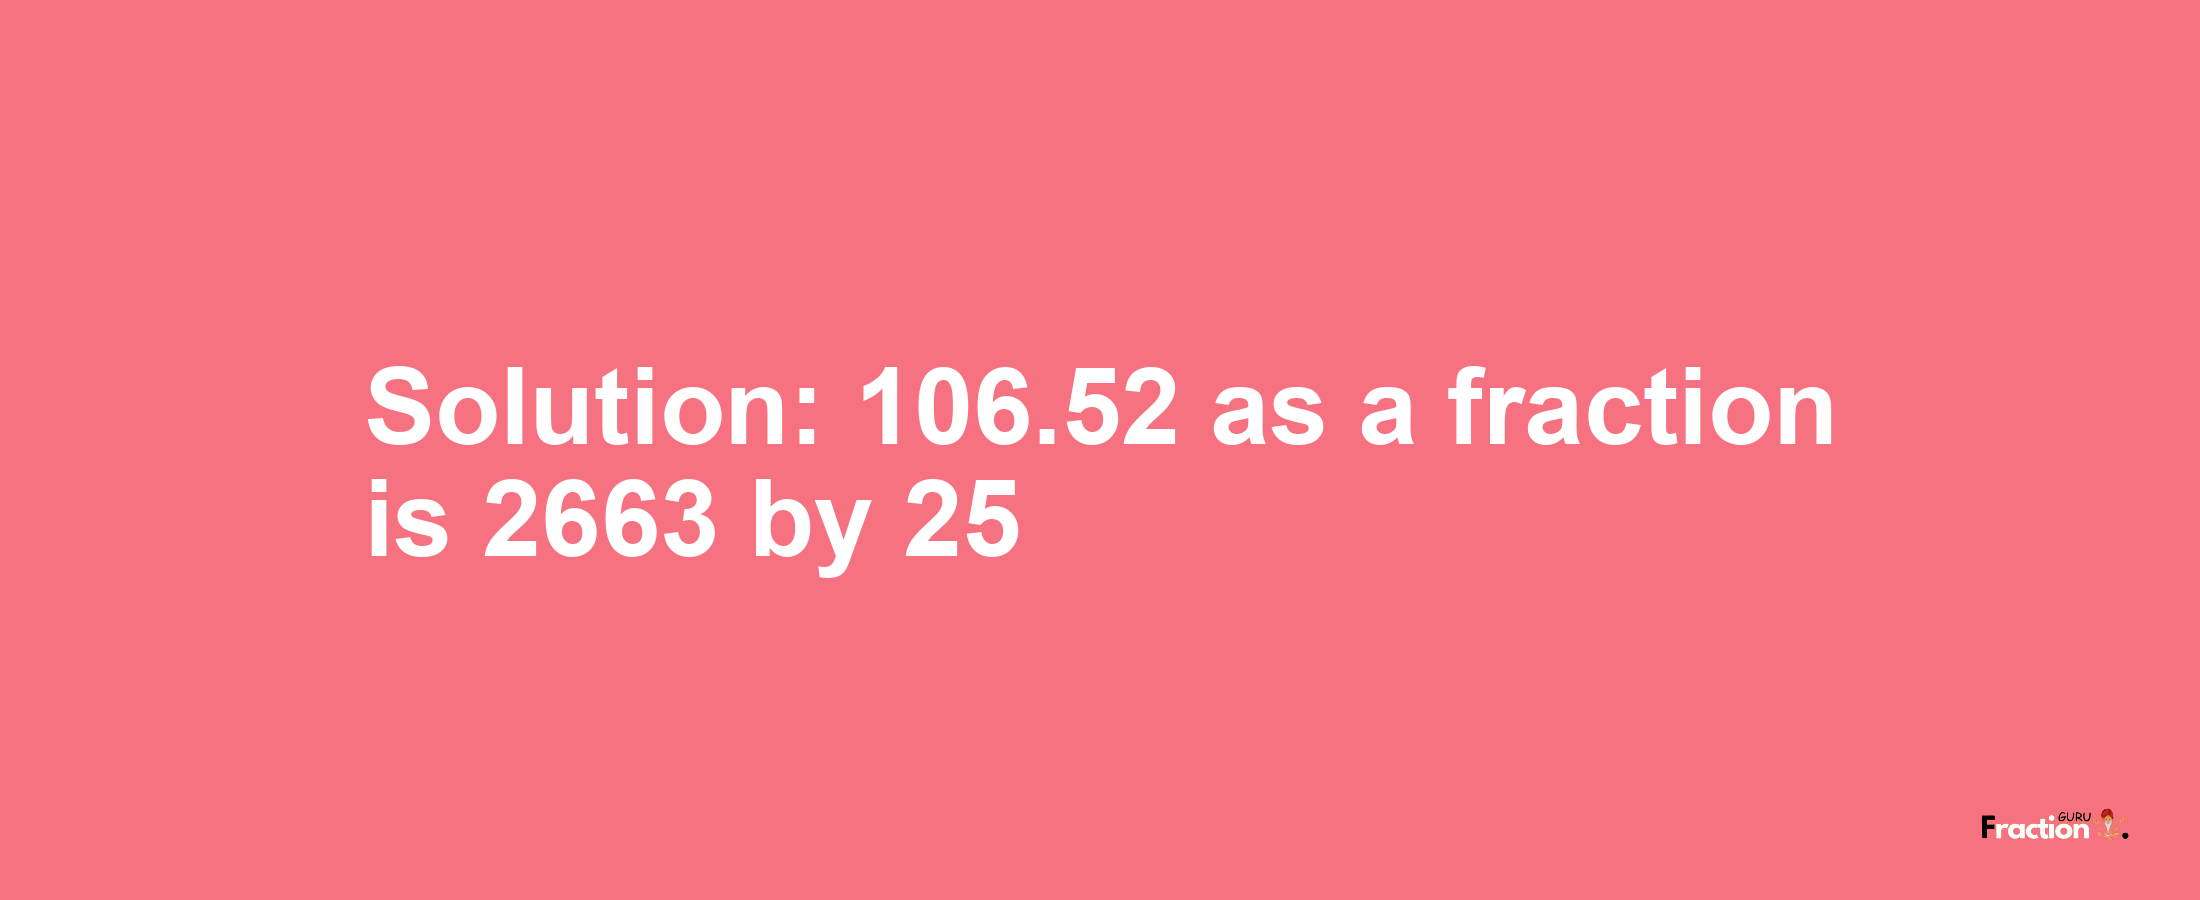 Solution:106.52 as a fraction is 2663/25